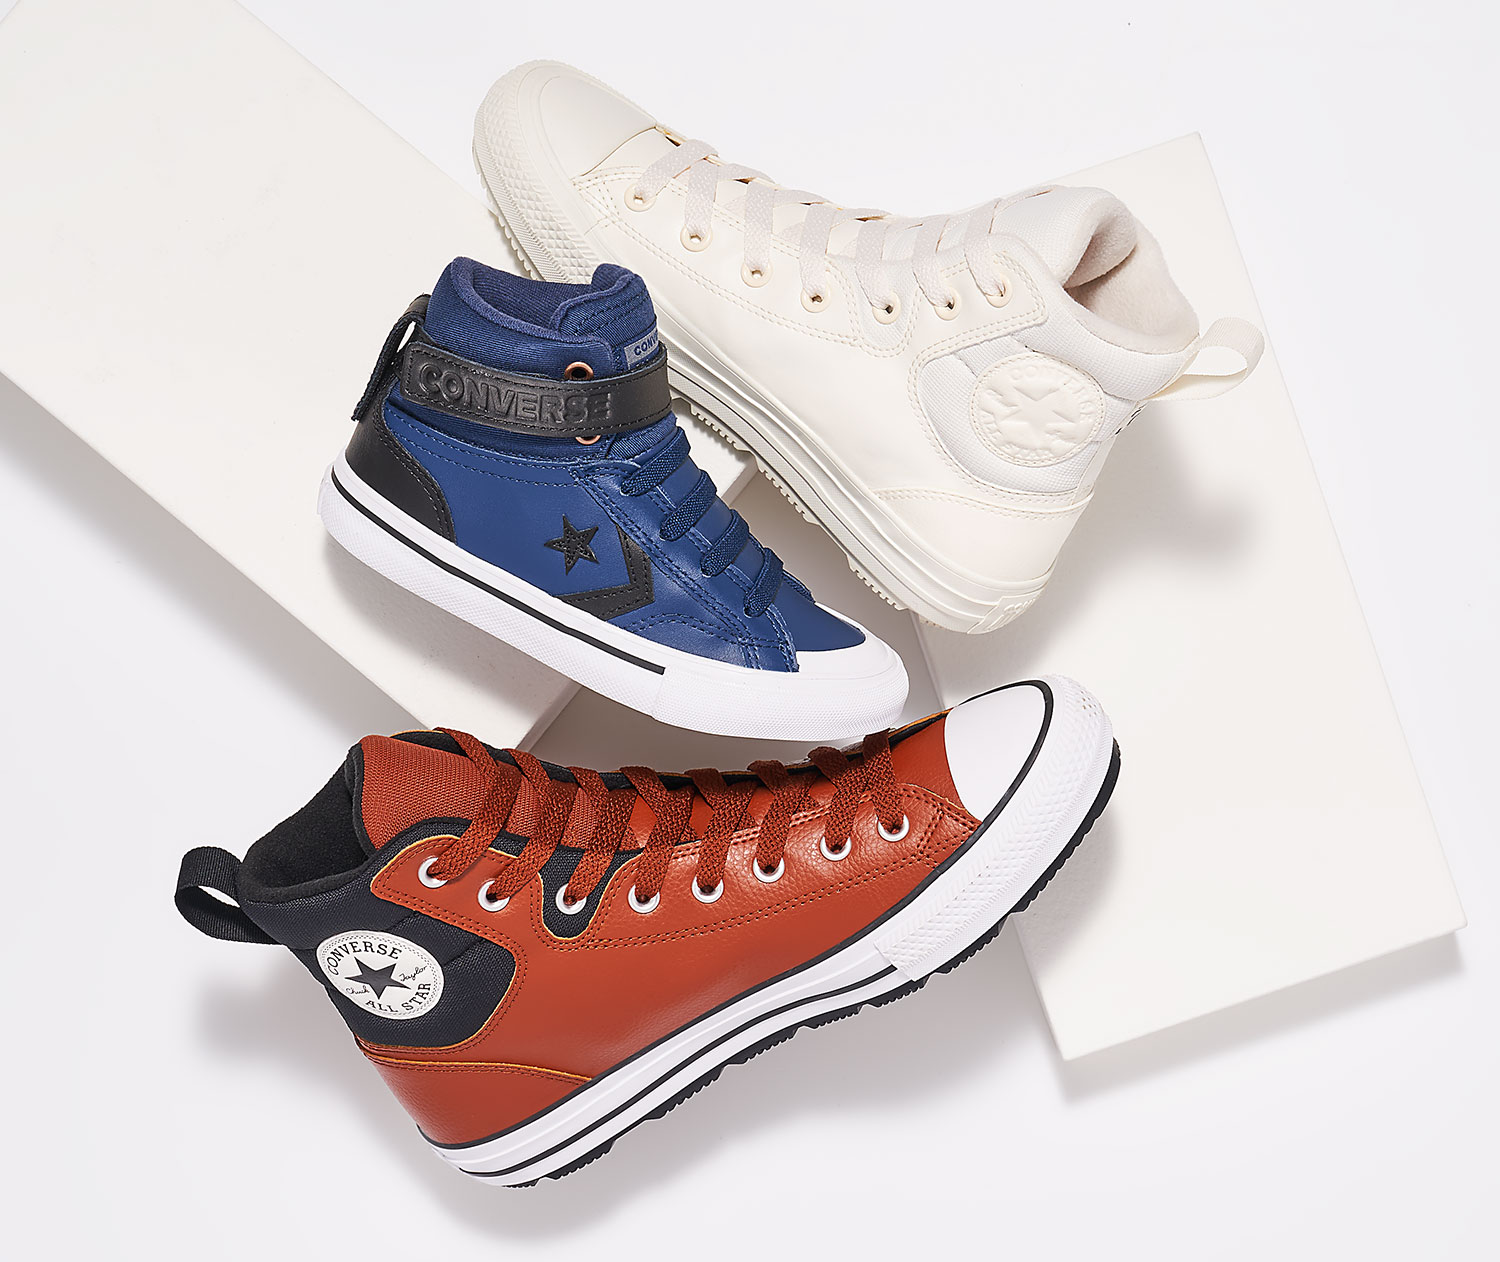 Converse Shoes, Sneakers \u0026 High Tops 